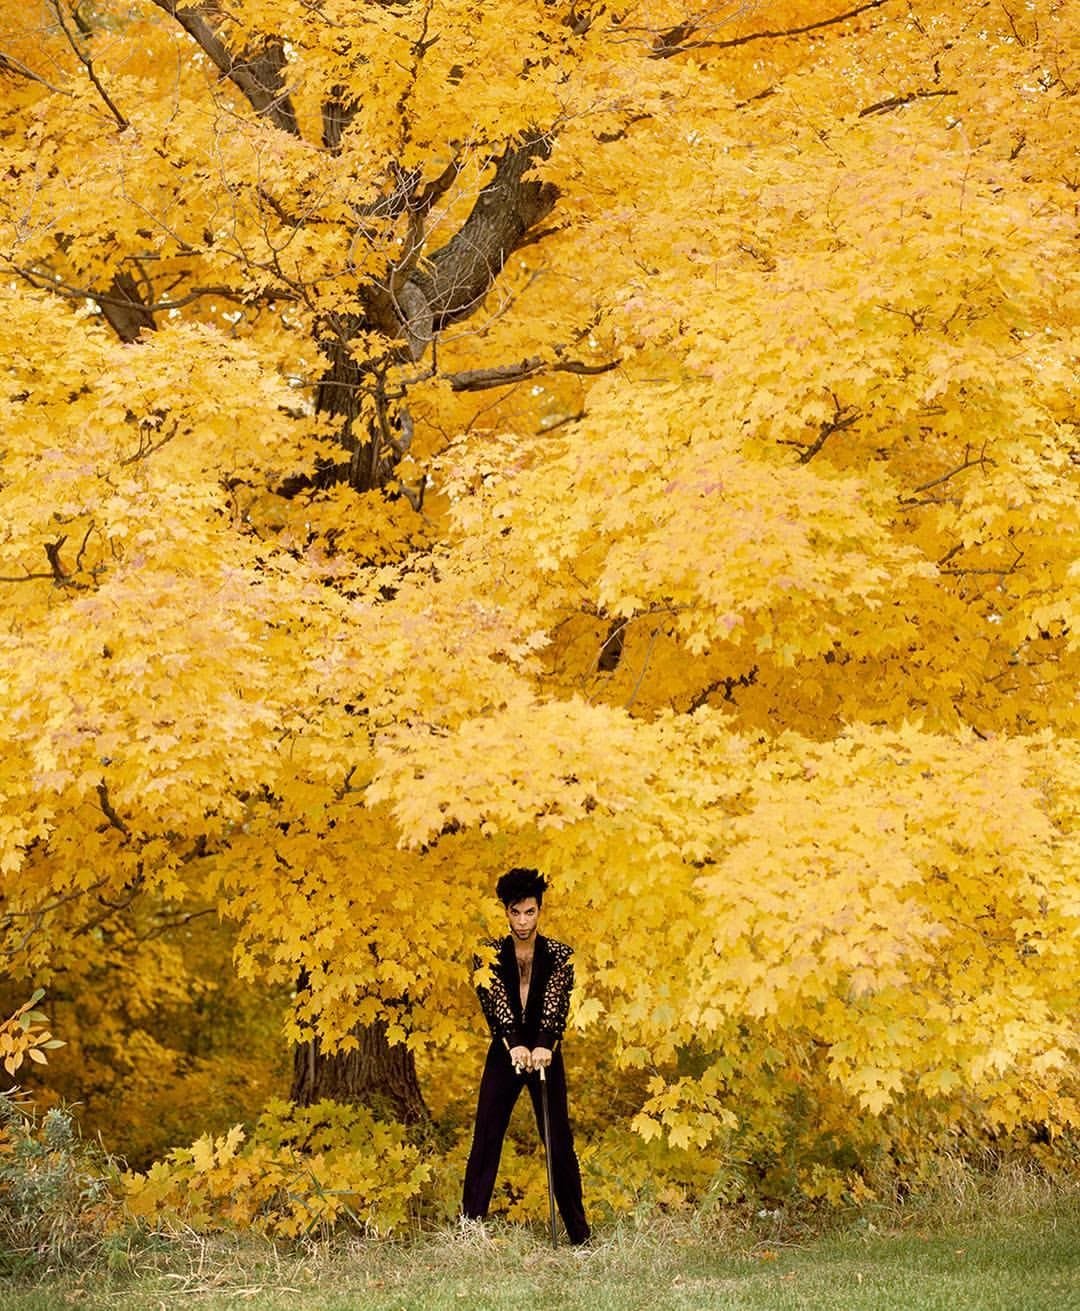 Prince stands in front of a gigantic tree. i think it might be an oak tree but this tree is COVERED in yellow leaves. Prince appears very small in front of it. nature is abundant. autumn is present. we feel the season.